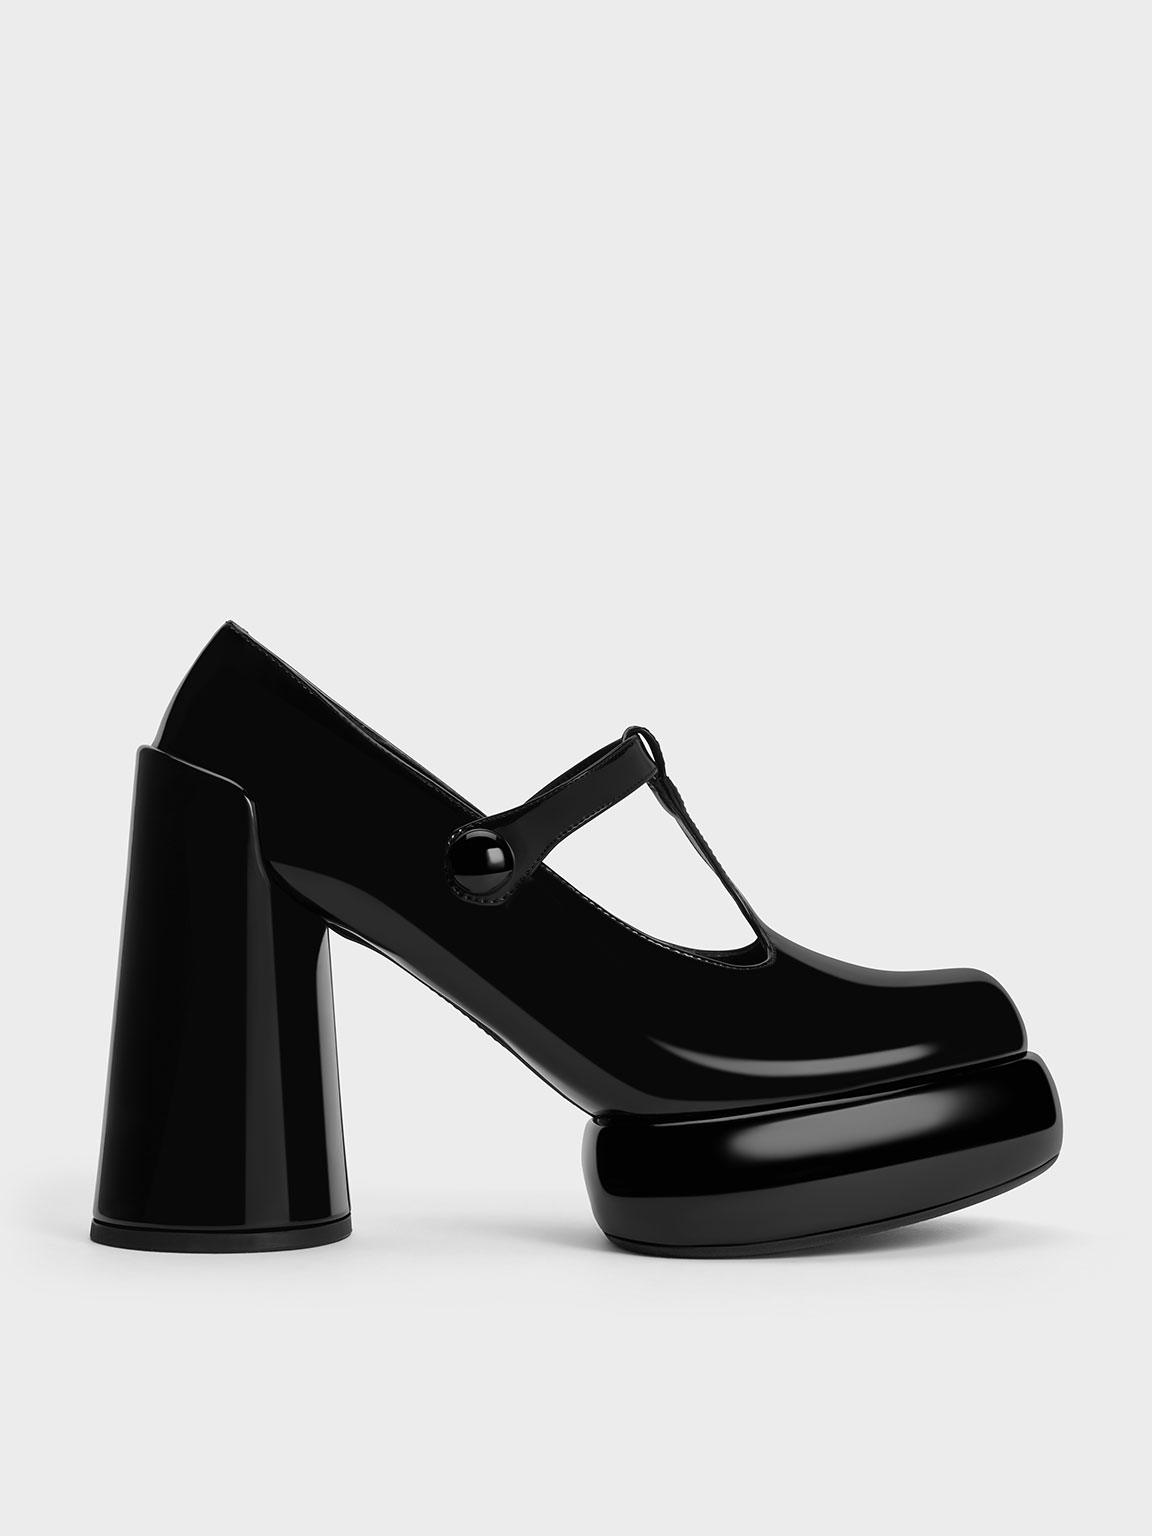 Charles & Keith Darcy Patent T-bar Platform Mary Janes In Black Patent